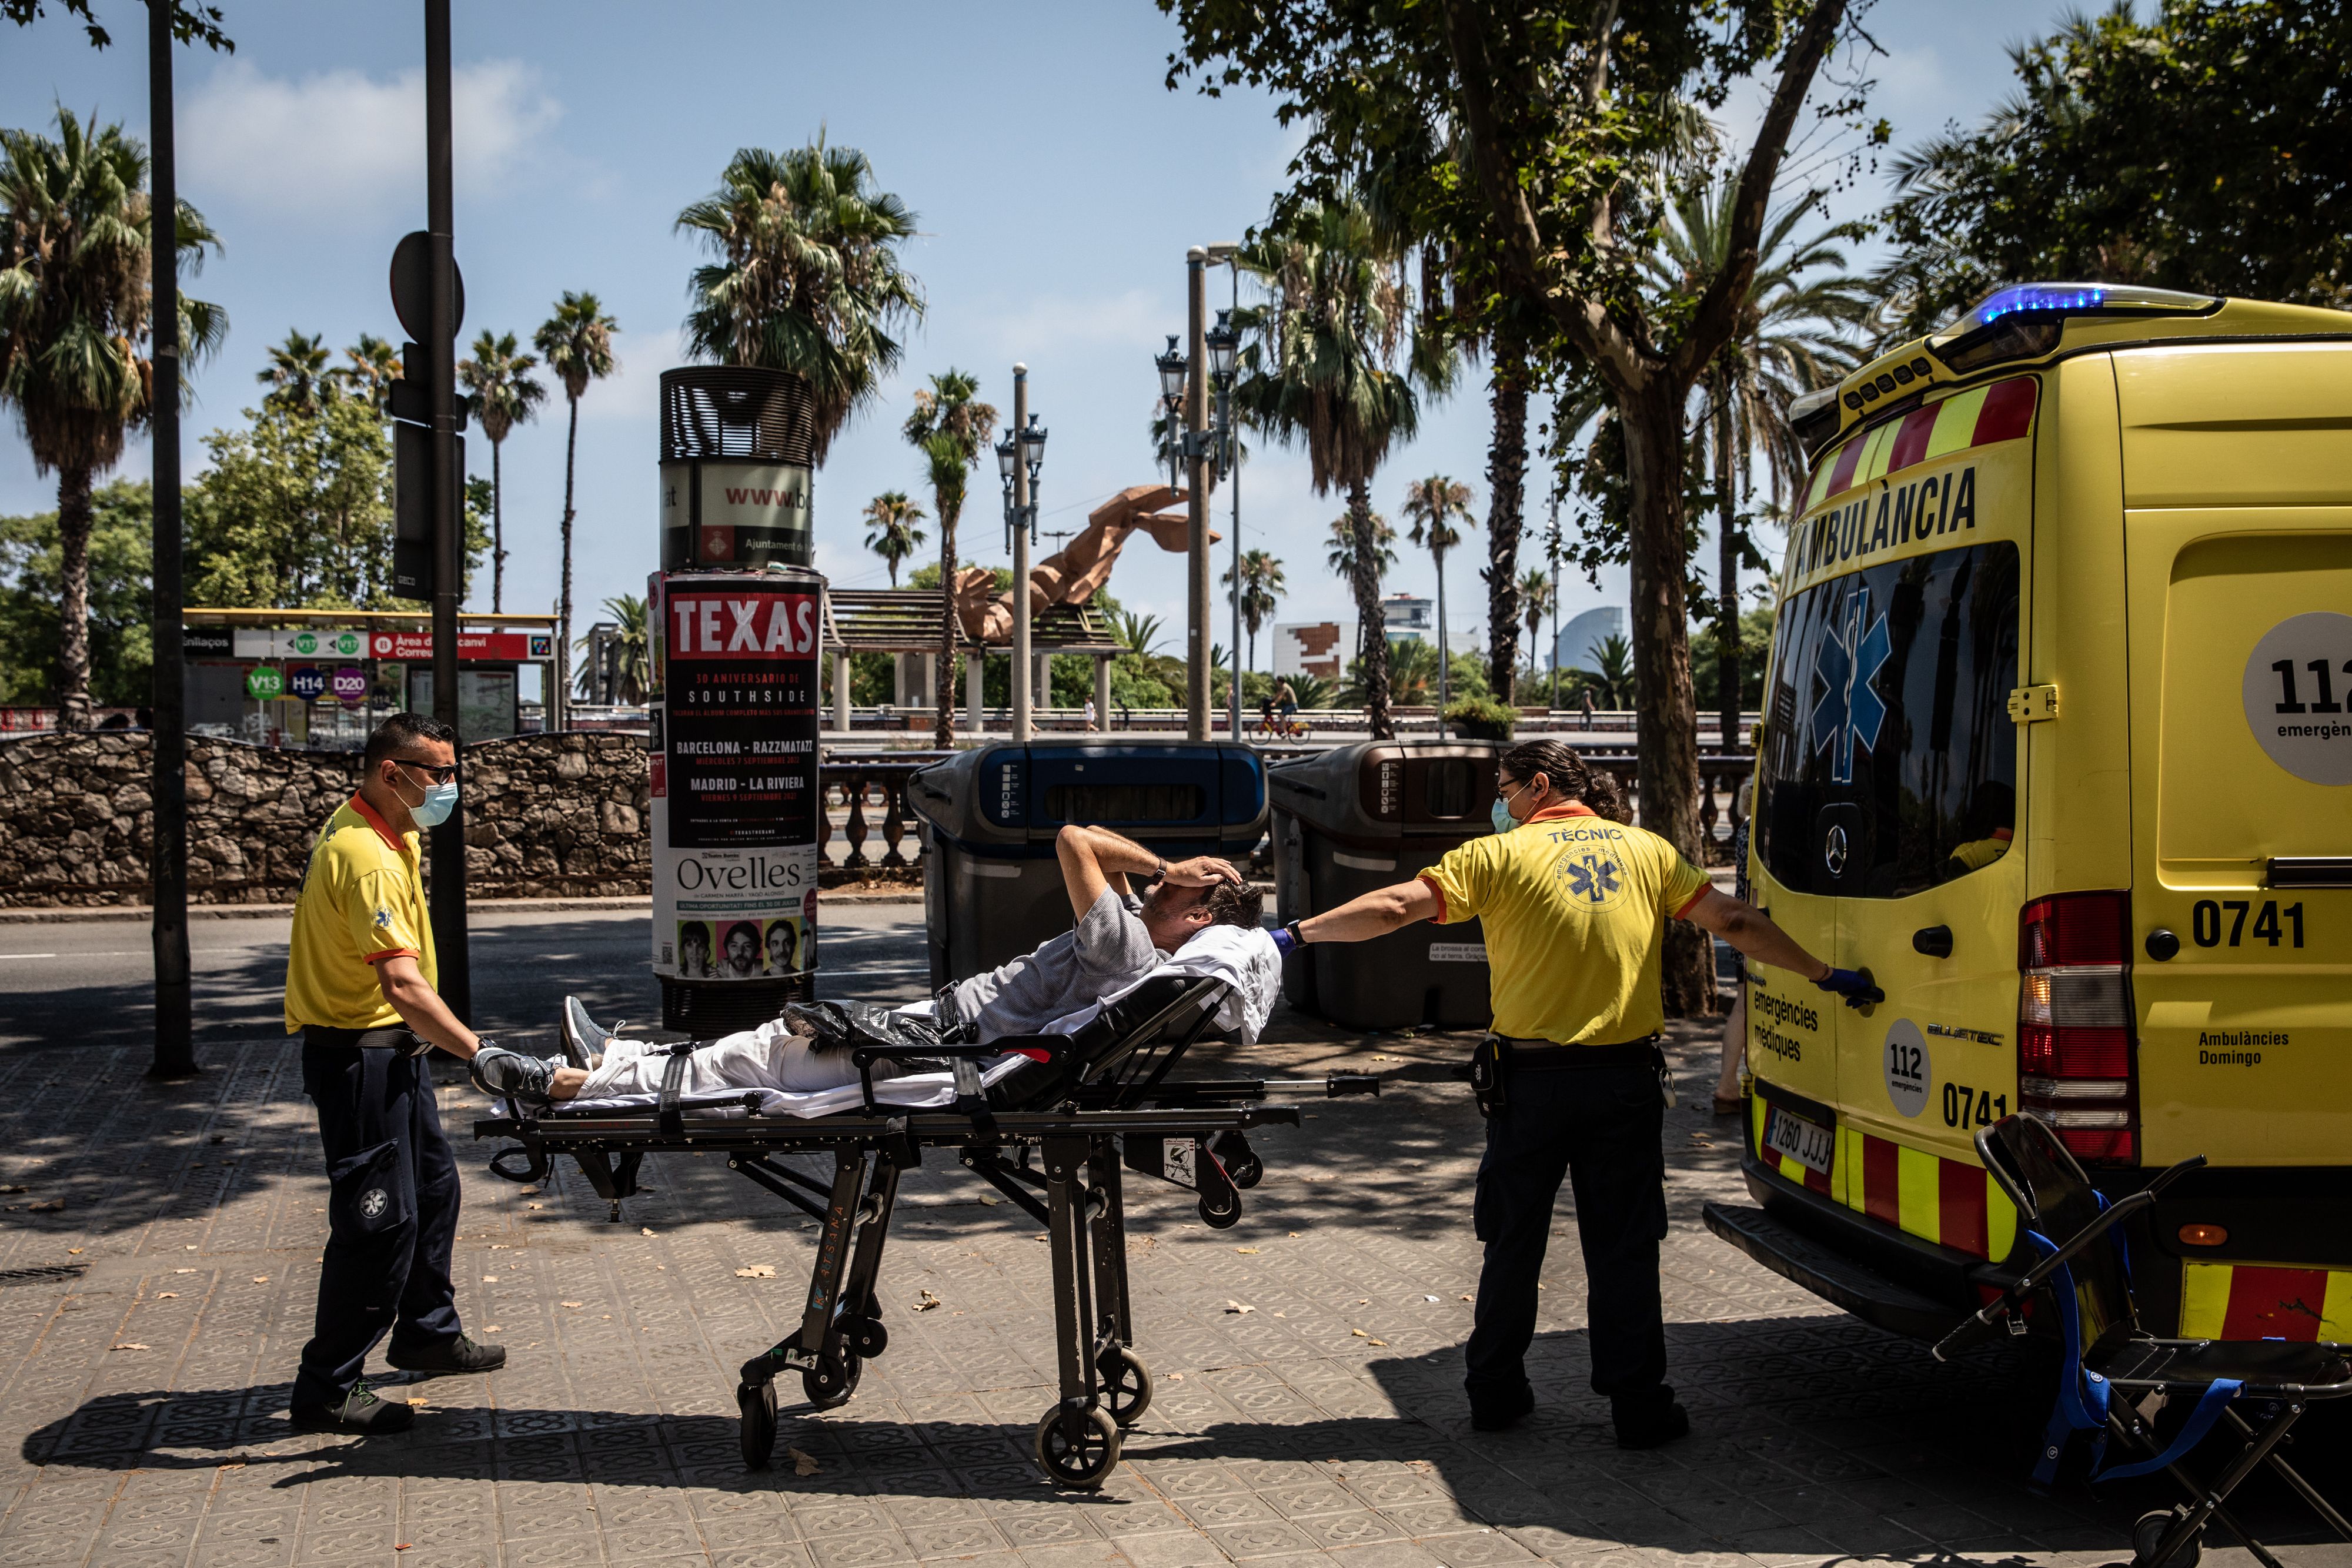 Paramedics help a patient into an ambulance during a heat wave in Barcelona, Spain, on Monday, July 18, 2022. The heat wave killed 360 people dead in Spain between July 10 and 15, Instituto de Salud Carlos III said on Saturday.